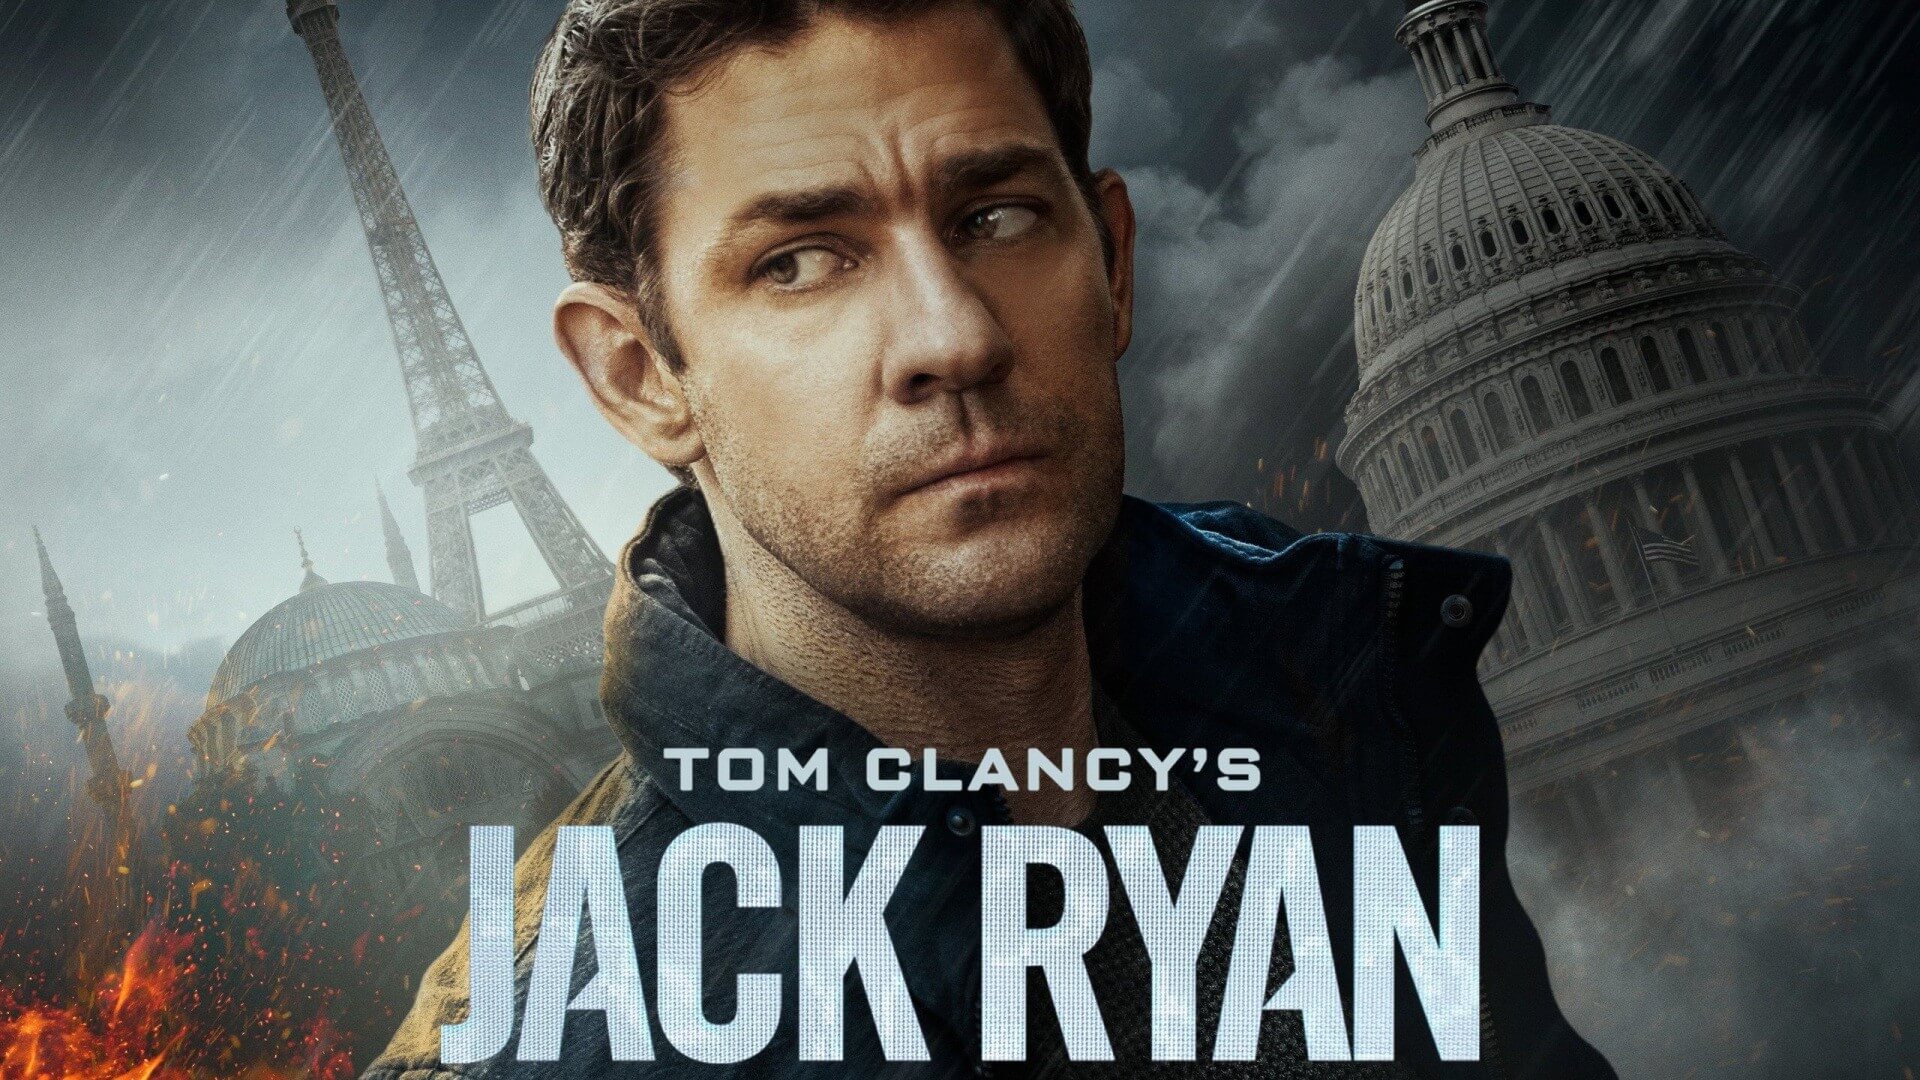 Jack Ryan Season 3 Release Date and New Episodes